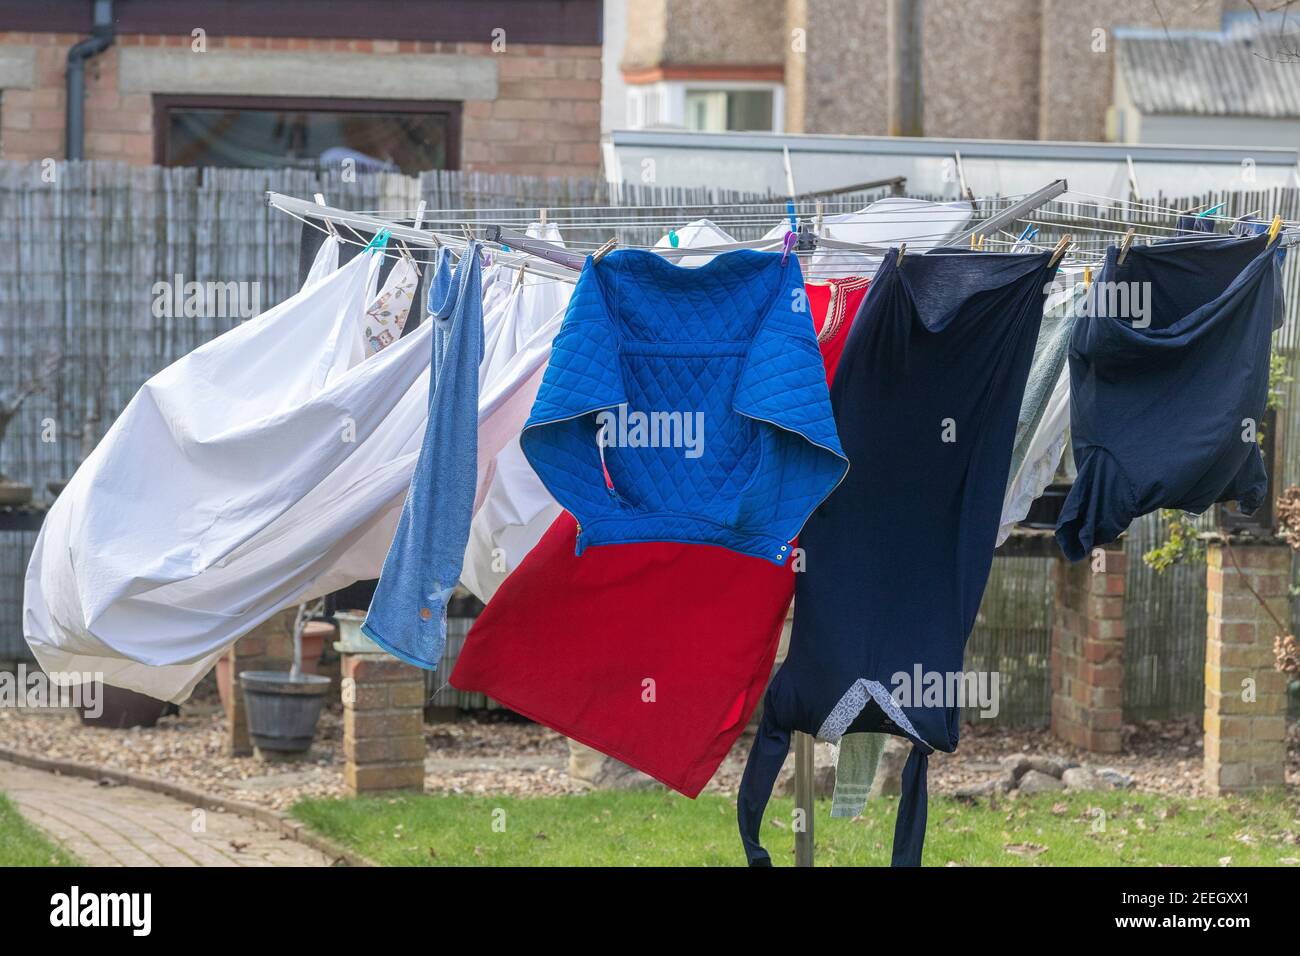 Washing hang on a rotary cloths line blowing in the wind in a backgarden, Northampton, England, UK. Stock Photo